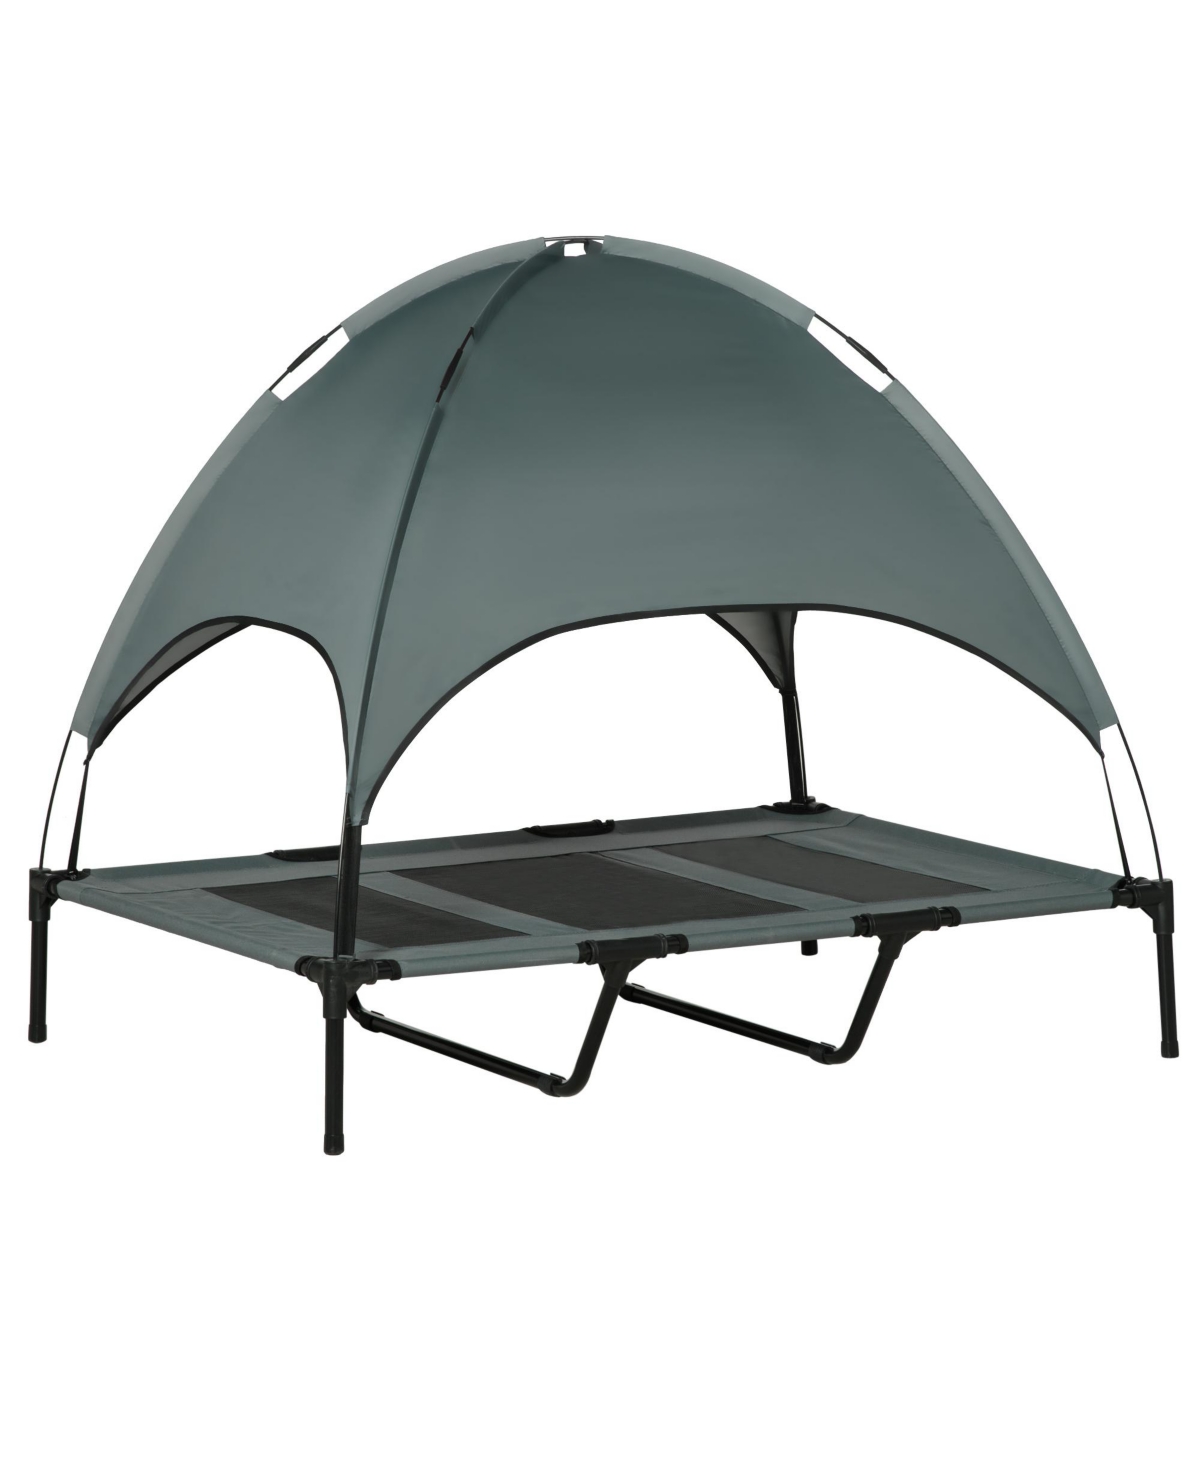 Elevated Pet Bed Dog Foldable Cot Tent Canopy Instant Shelter Outdoor - Grey